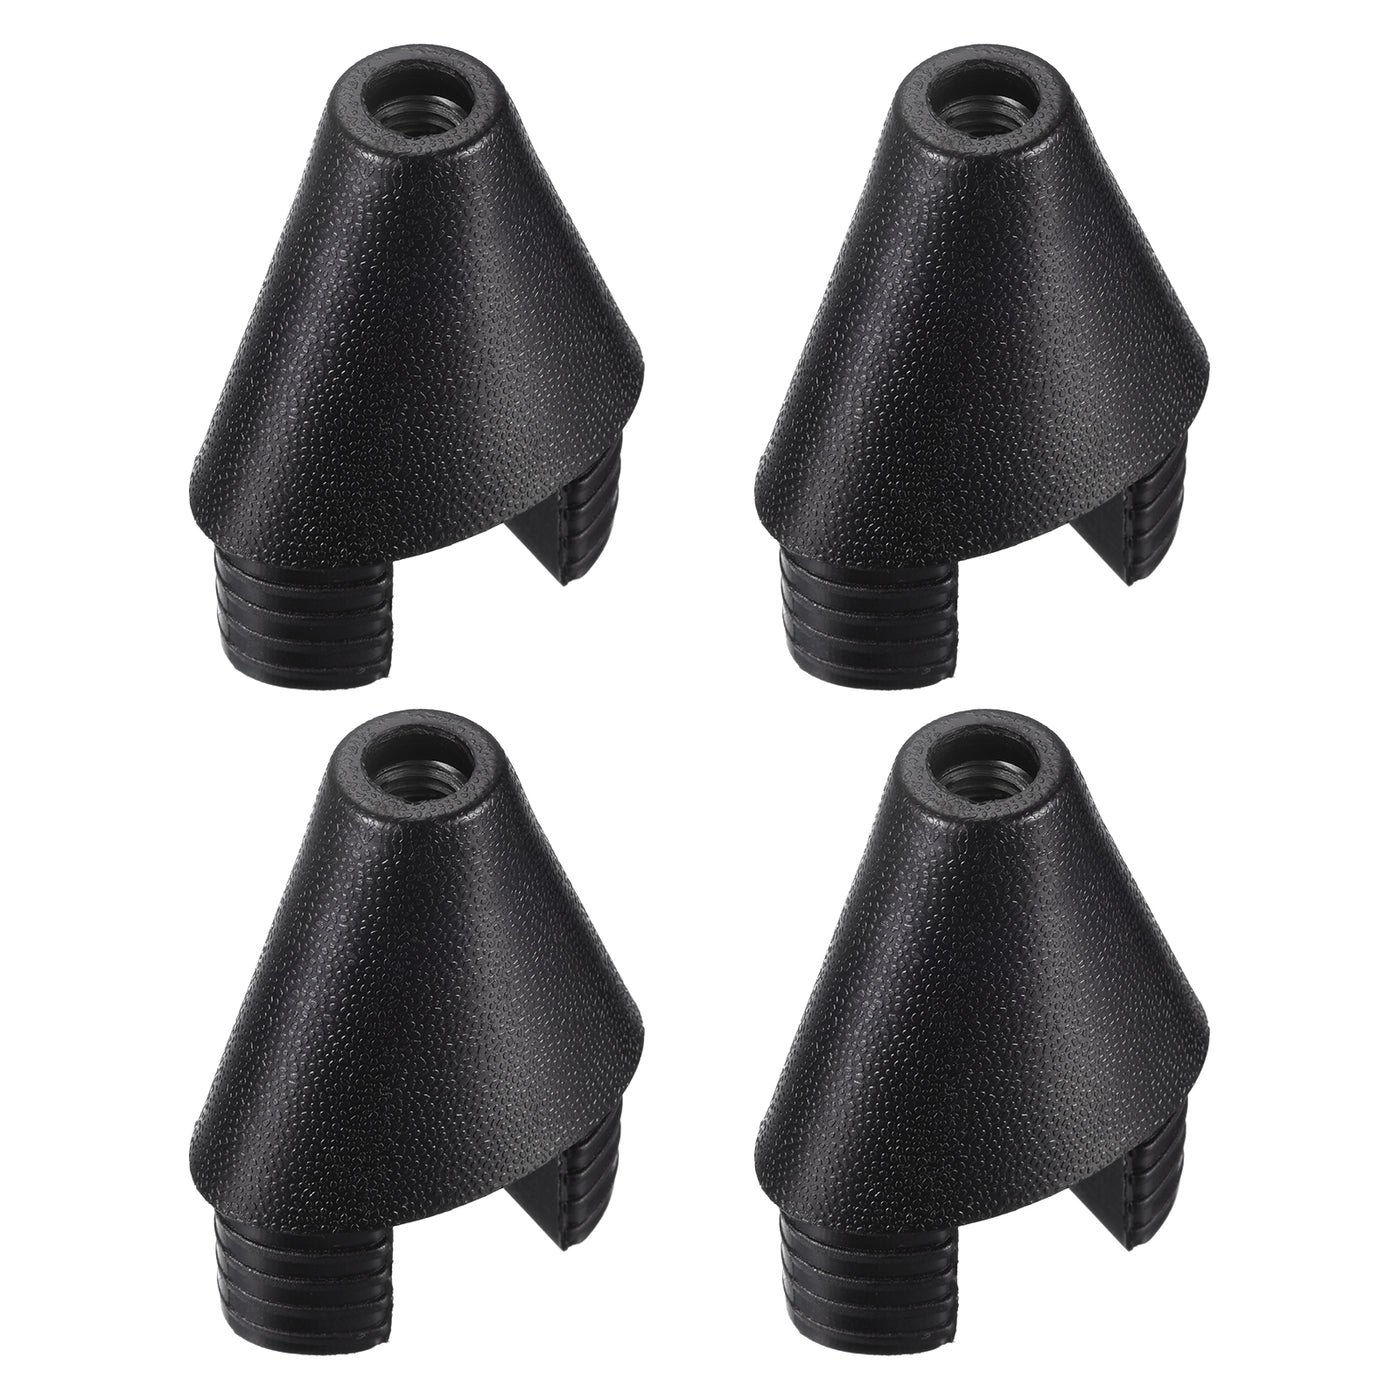 uxcell Uxcell 4Pcs 1.97"x1.18" Caster Insert with Thread, M10 Thread for Furniture